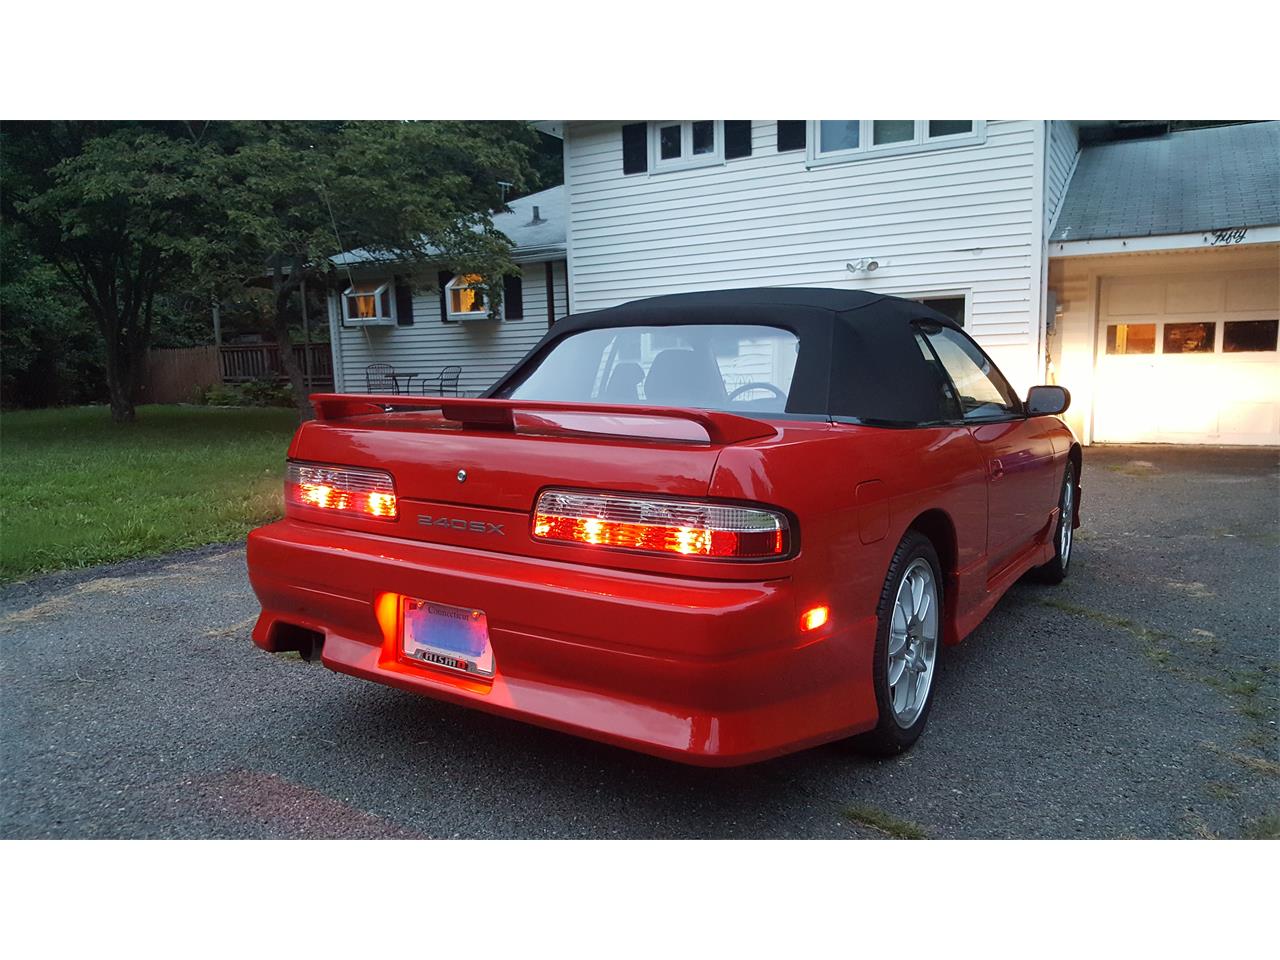 1994 Nissan 240SX for sale in Norwalk, CT / classiccarsbay.com